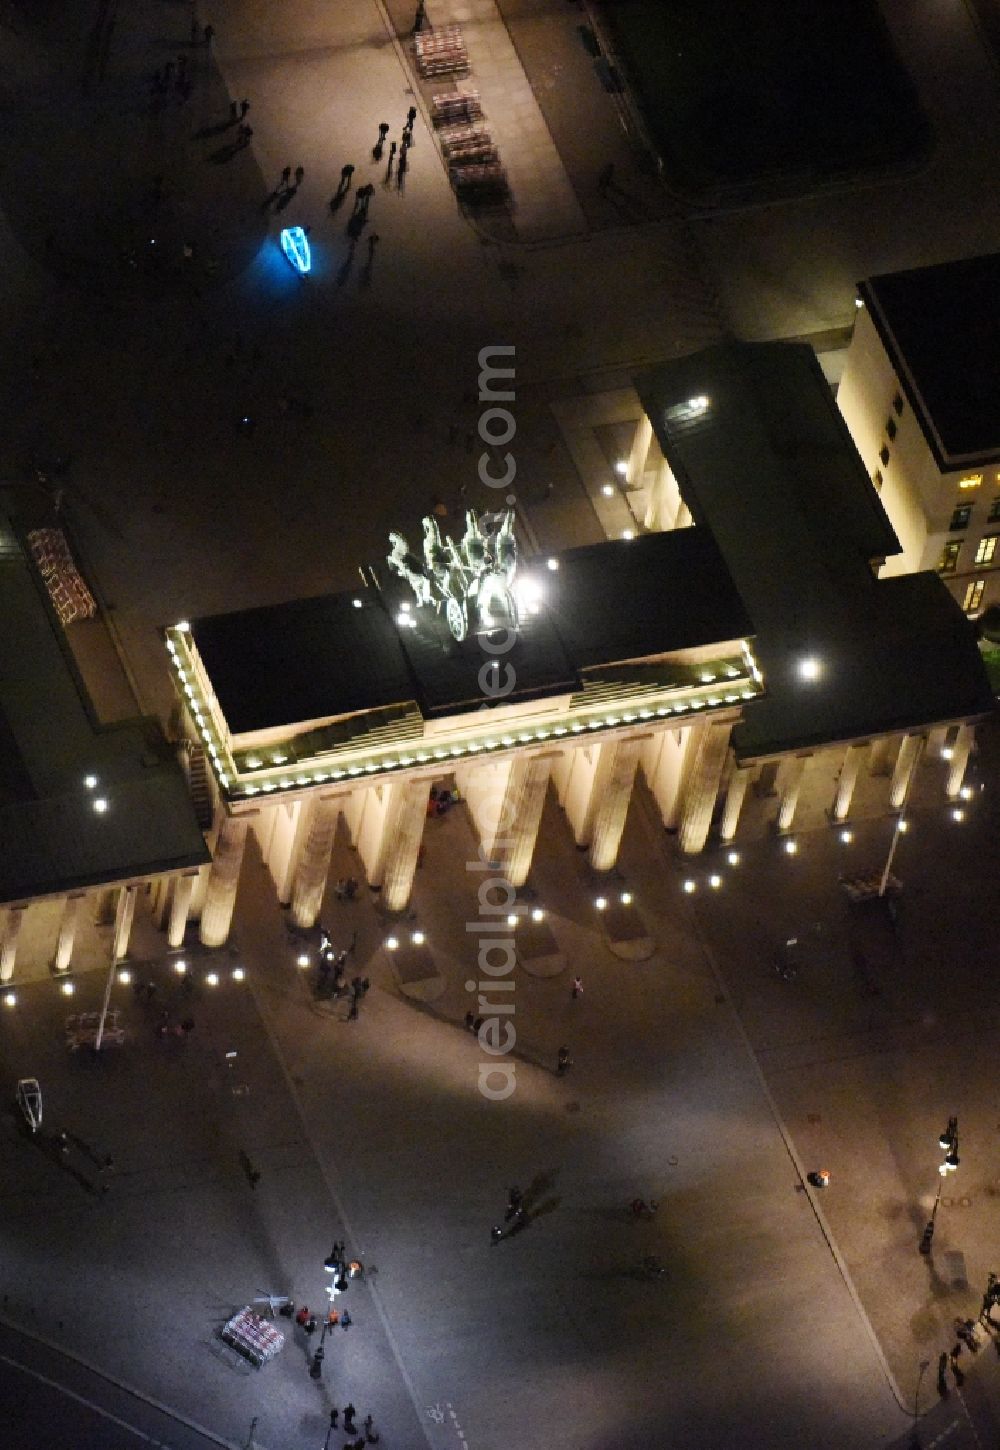 Berlin at night from the bird perspective: Night view of the Brandenburg Gate at the Pariser Platz in Berlin